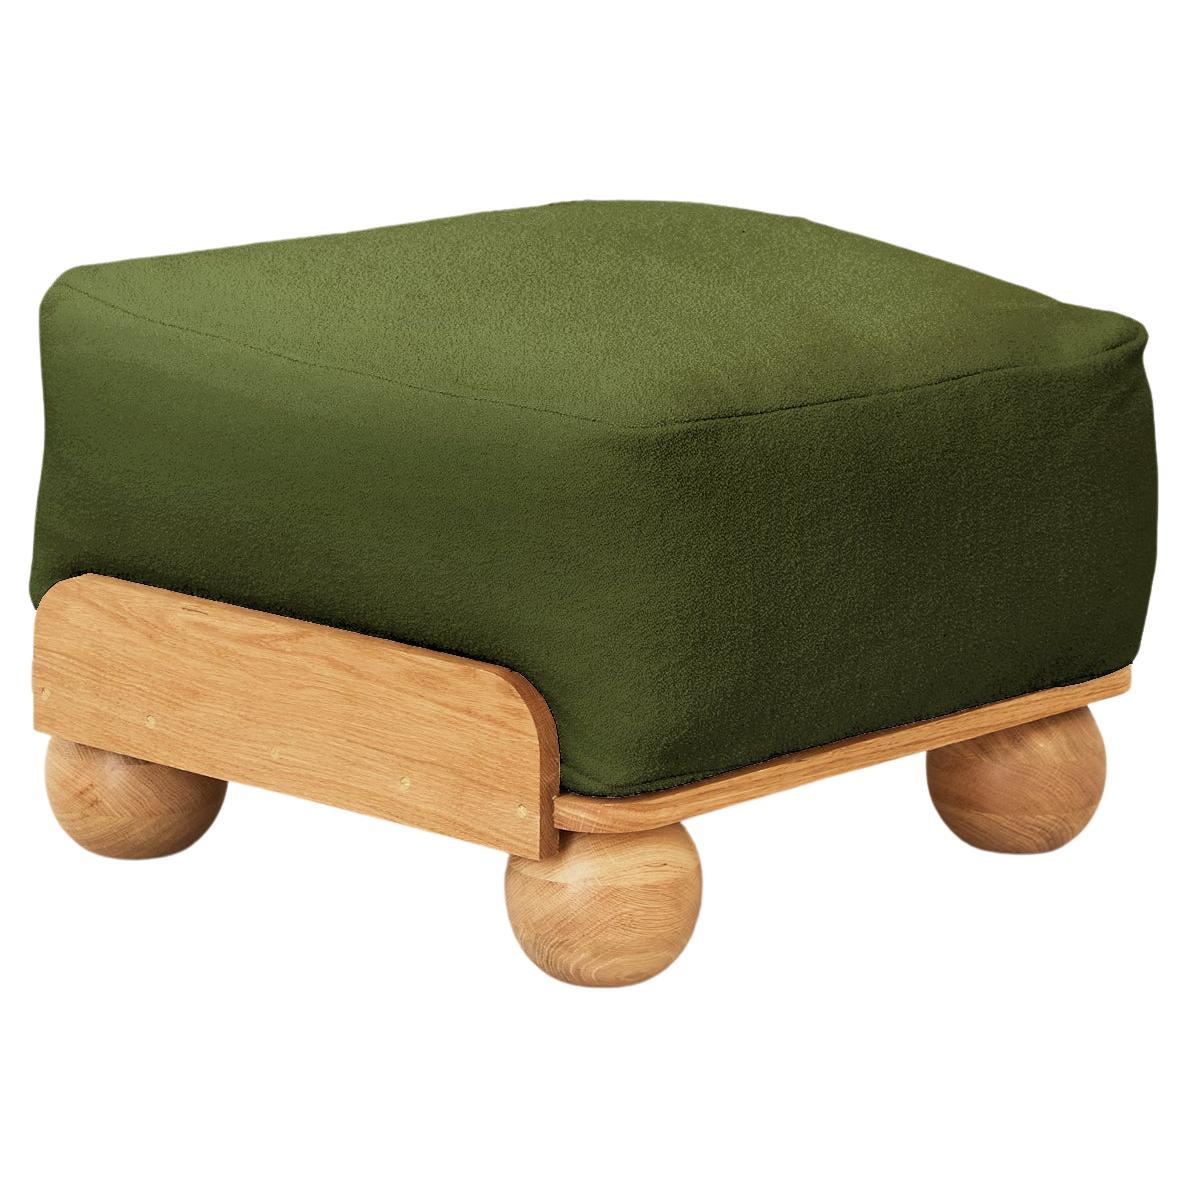 Cove Footstool in Woodland Green For Sale